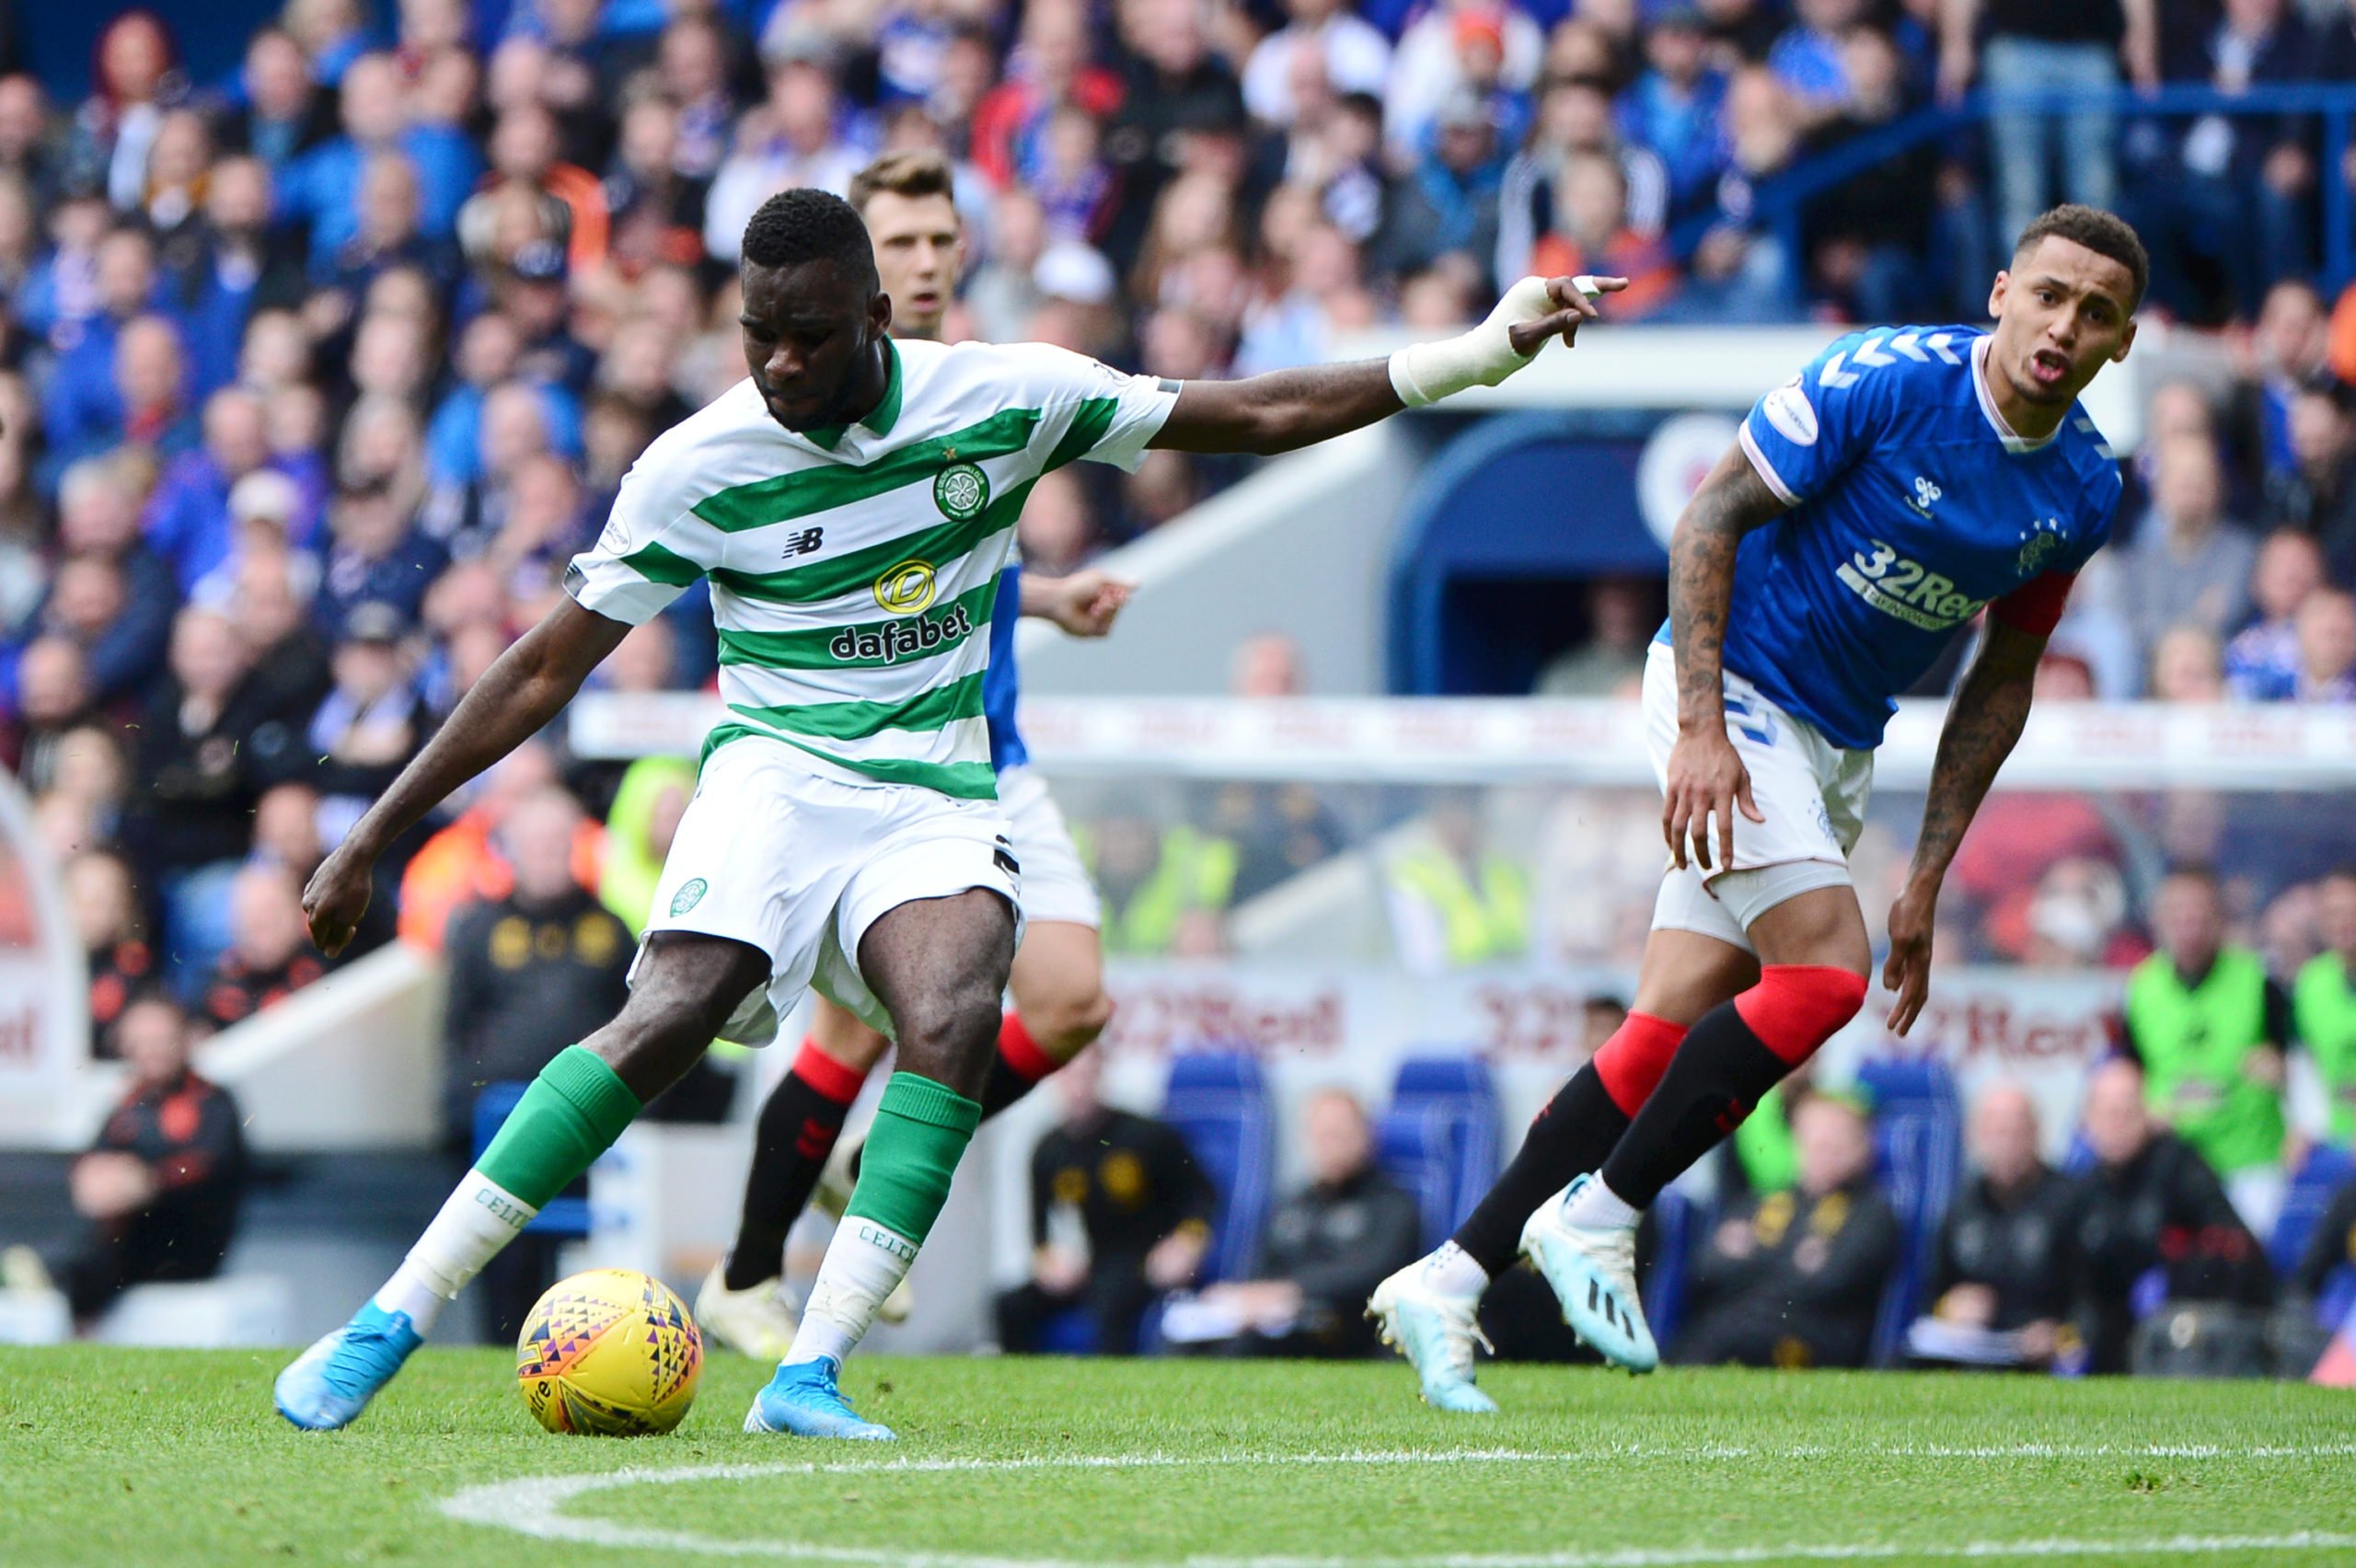 Celtic star Odsonne Edouard needs to produce against Rangers in the Scottish Cup